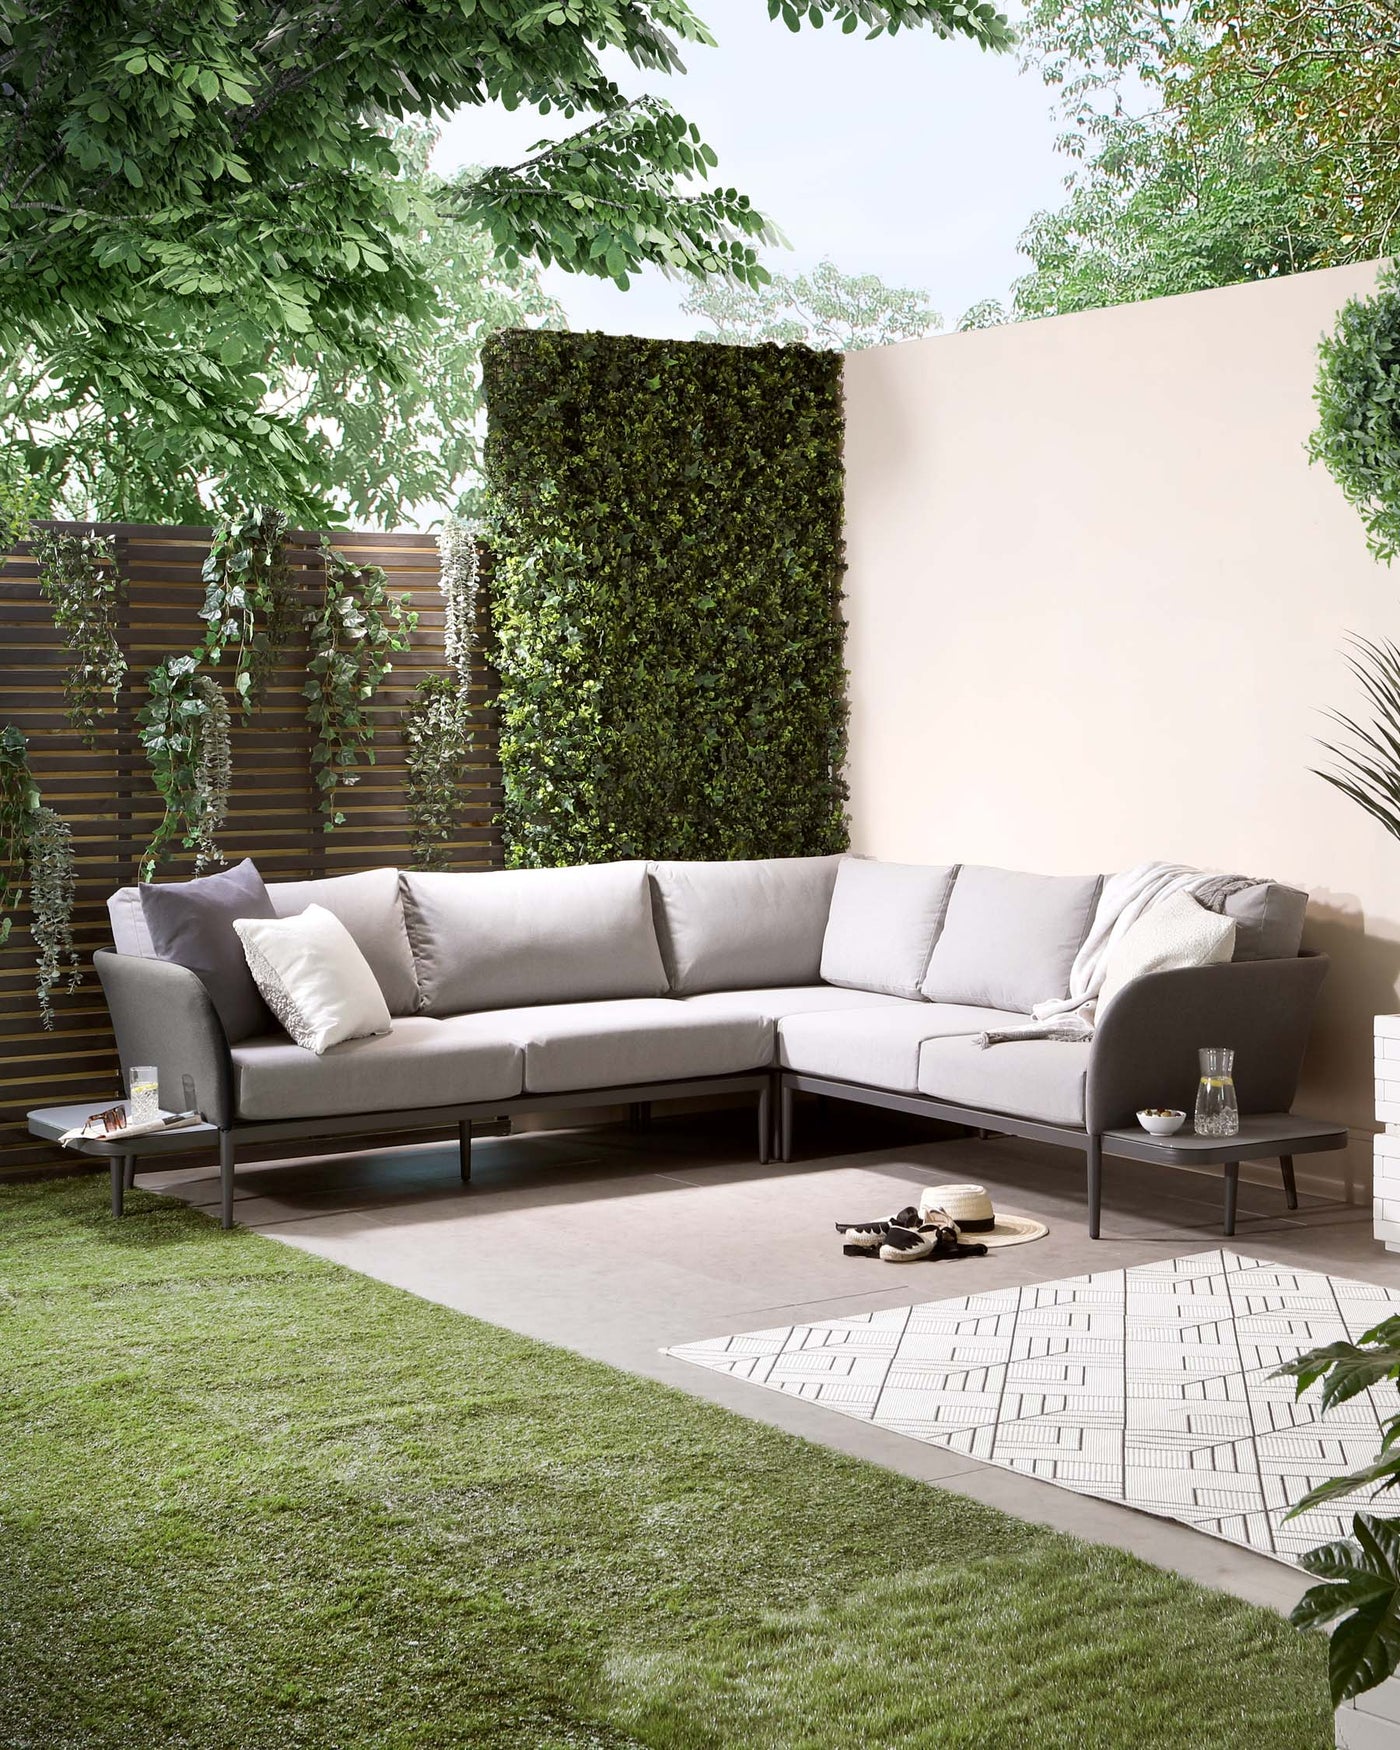 Modern outdoor L-shaped sectional sofa with light grey cushions on a low-profile black metal frame, paired with a small round side table featuring a similar design aesthetic. A decorative grey and white geometric patterned area rug is placed under the sofa.